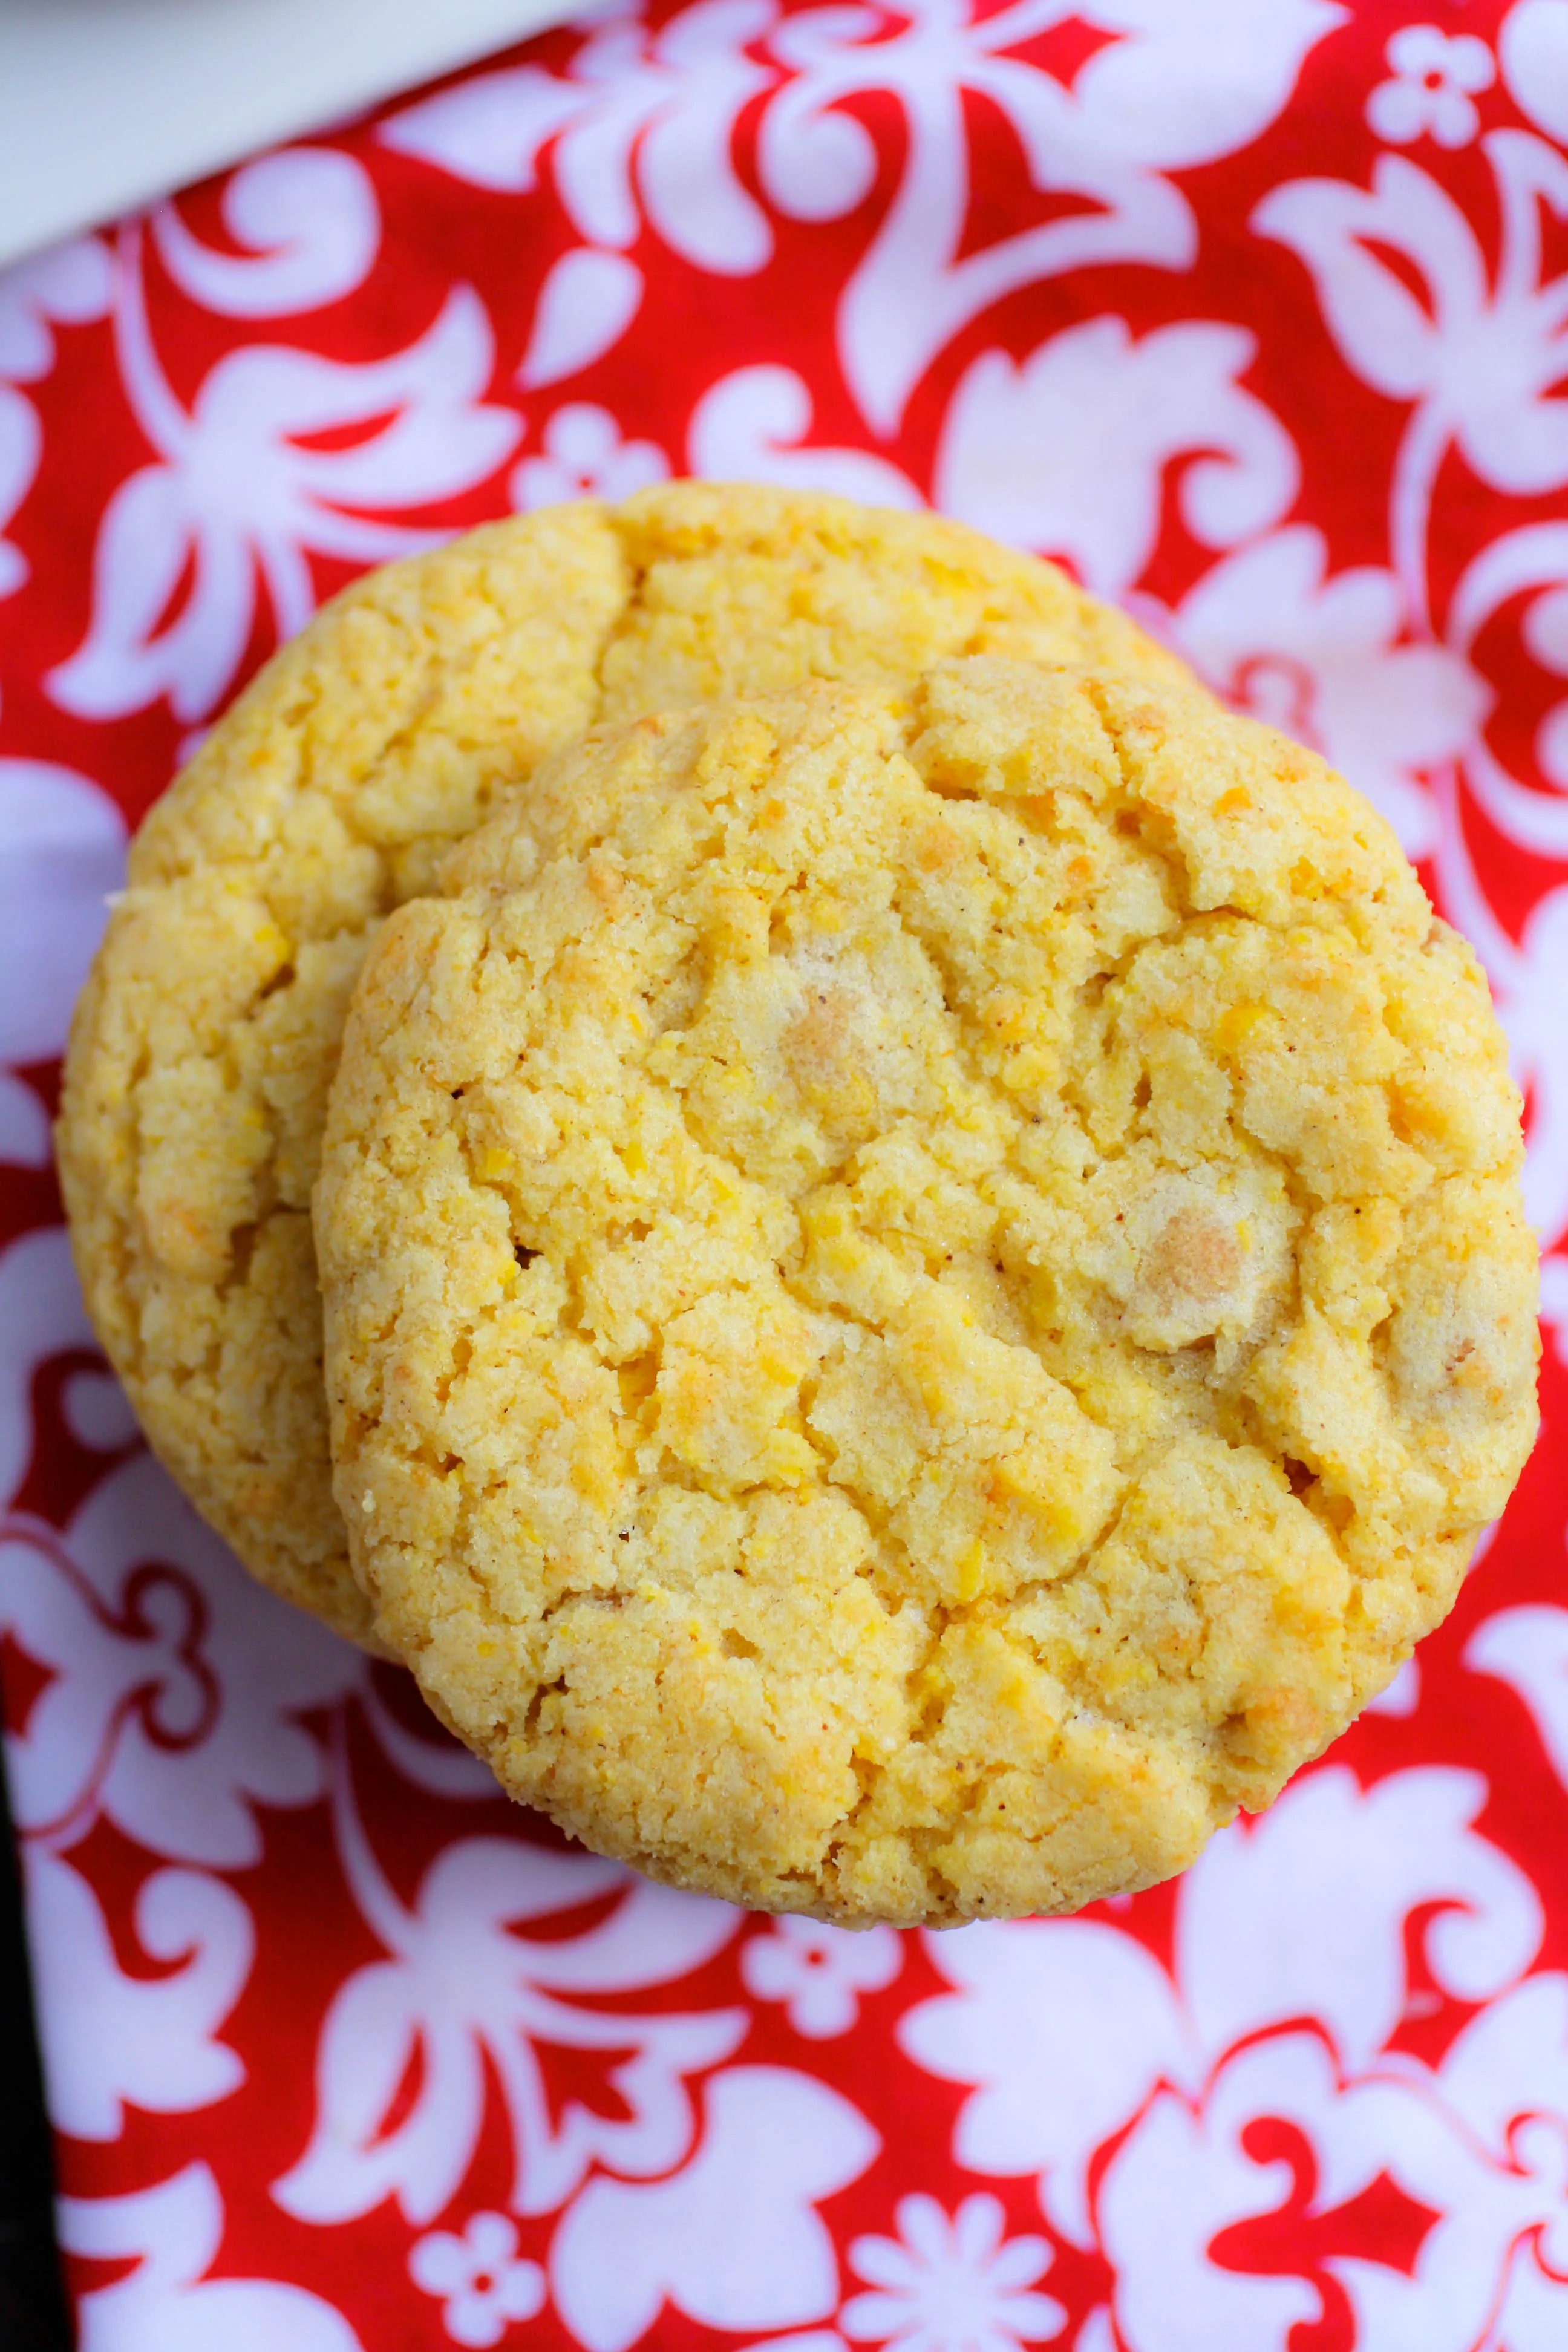 Spicy Caramel Corn Cookies are super tasty and they make a fab treat! Spicy Caramel Corn Cookies are like a wonderful bakery treat!